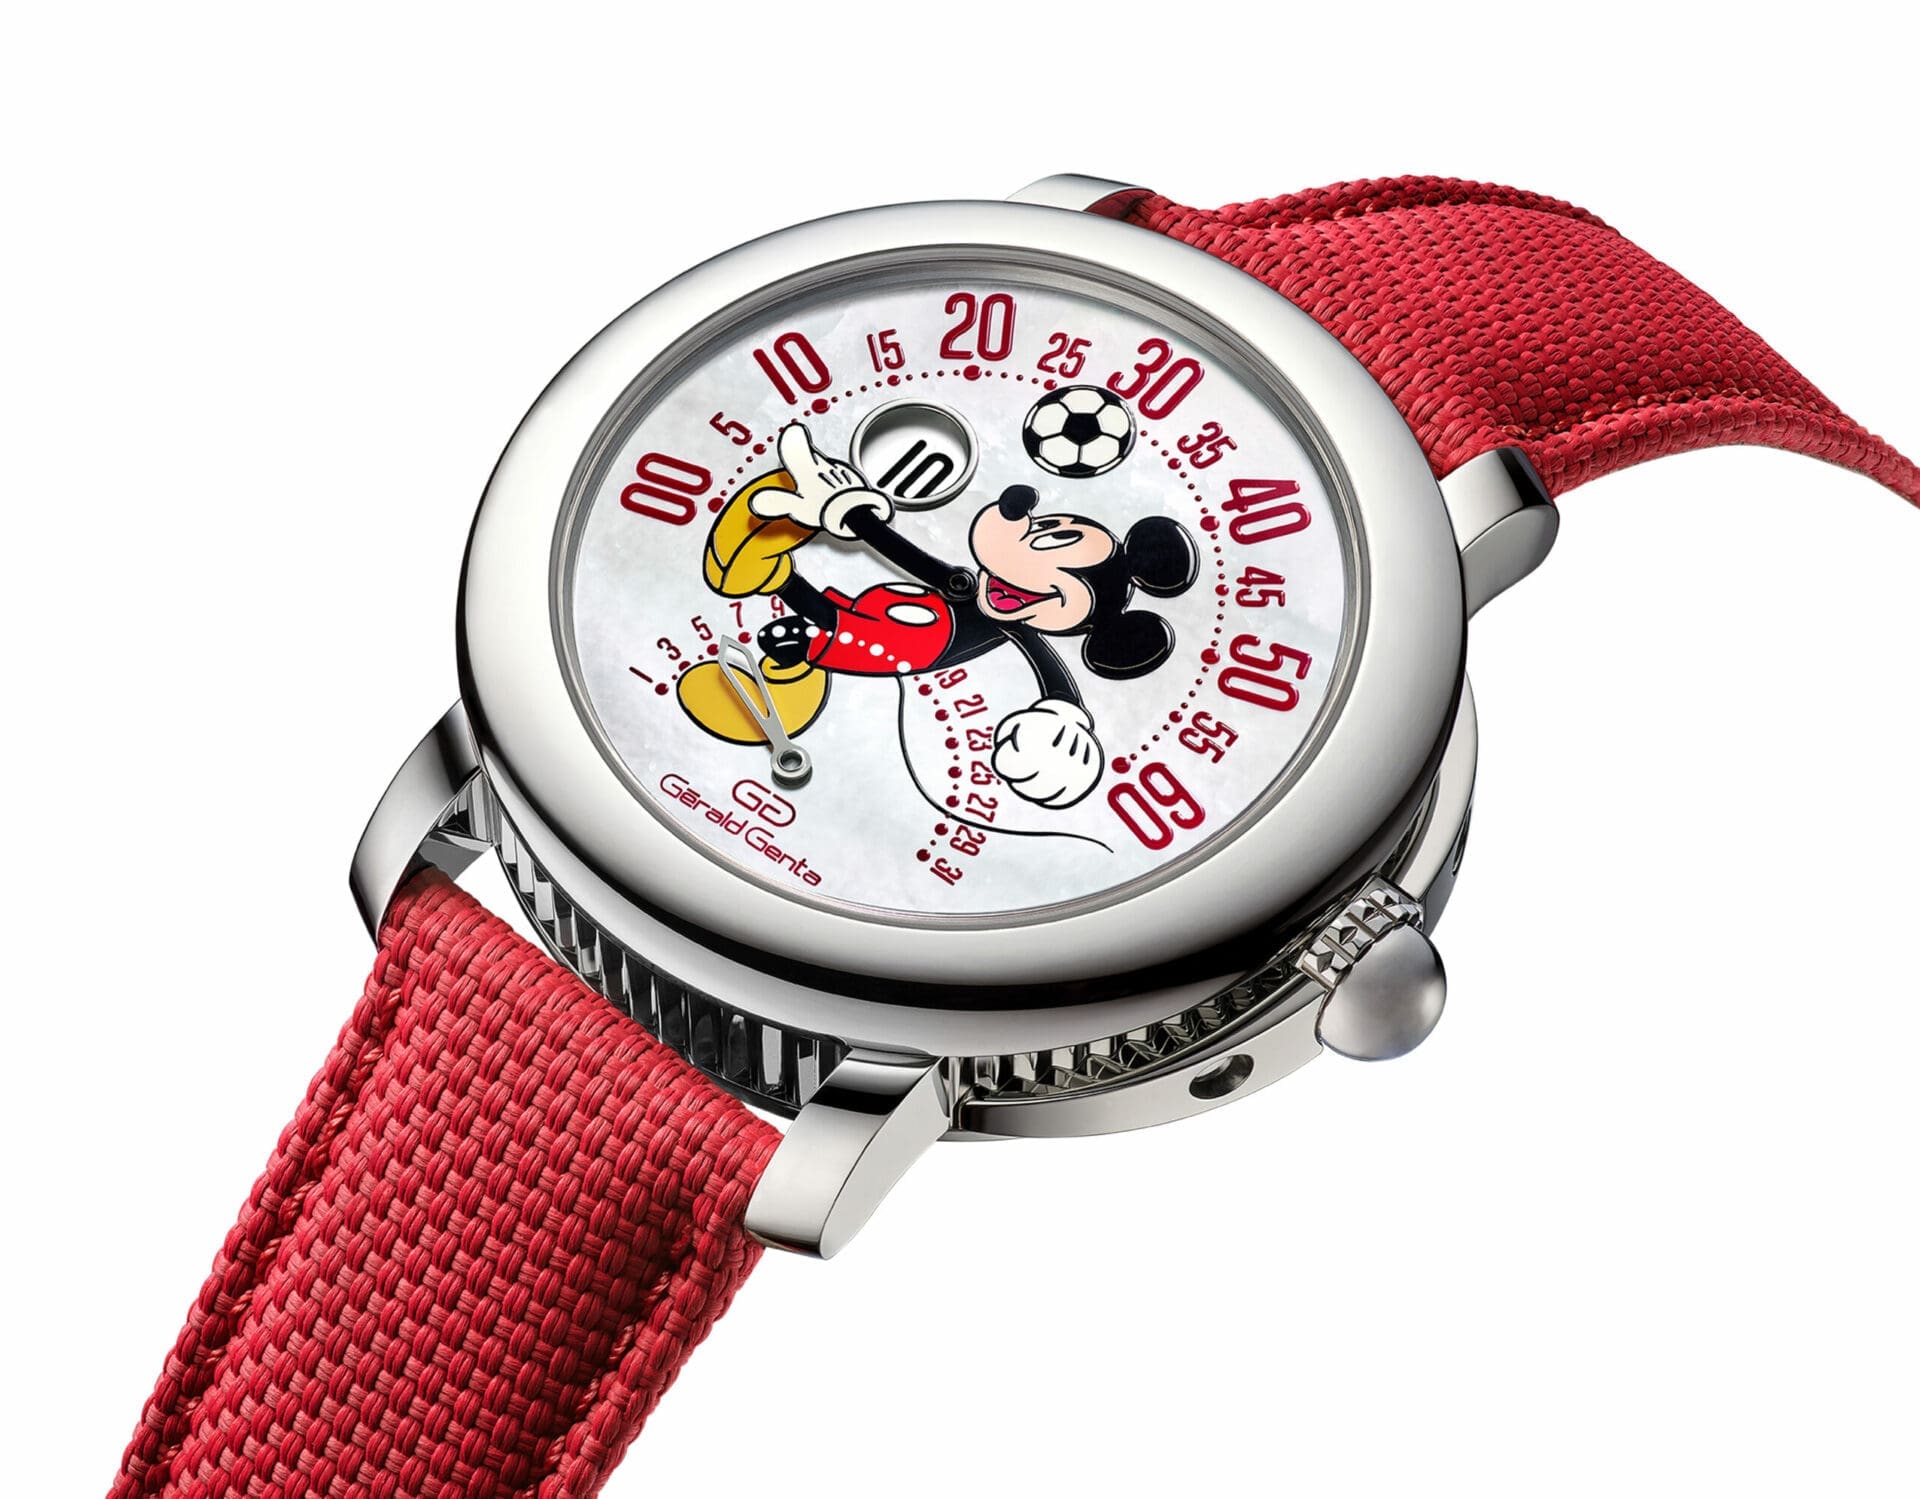 This new Gerald Genta watch displays Mickey Mouse playing football ahead of the World Cup